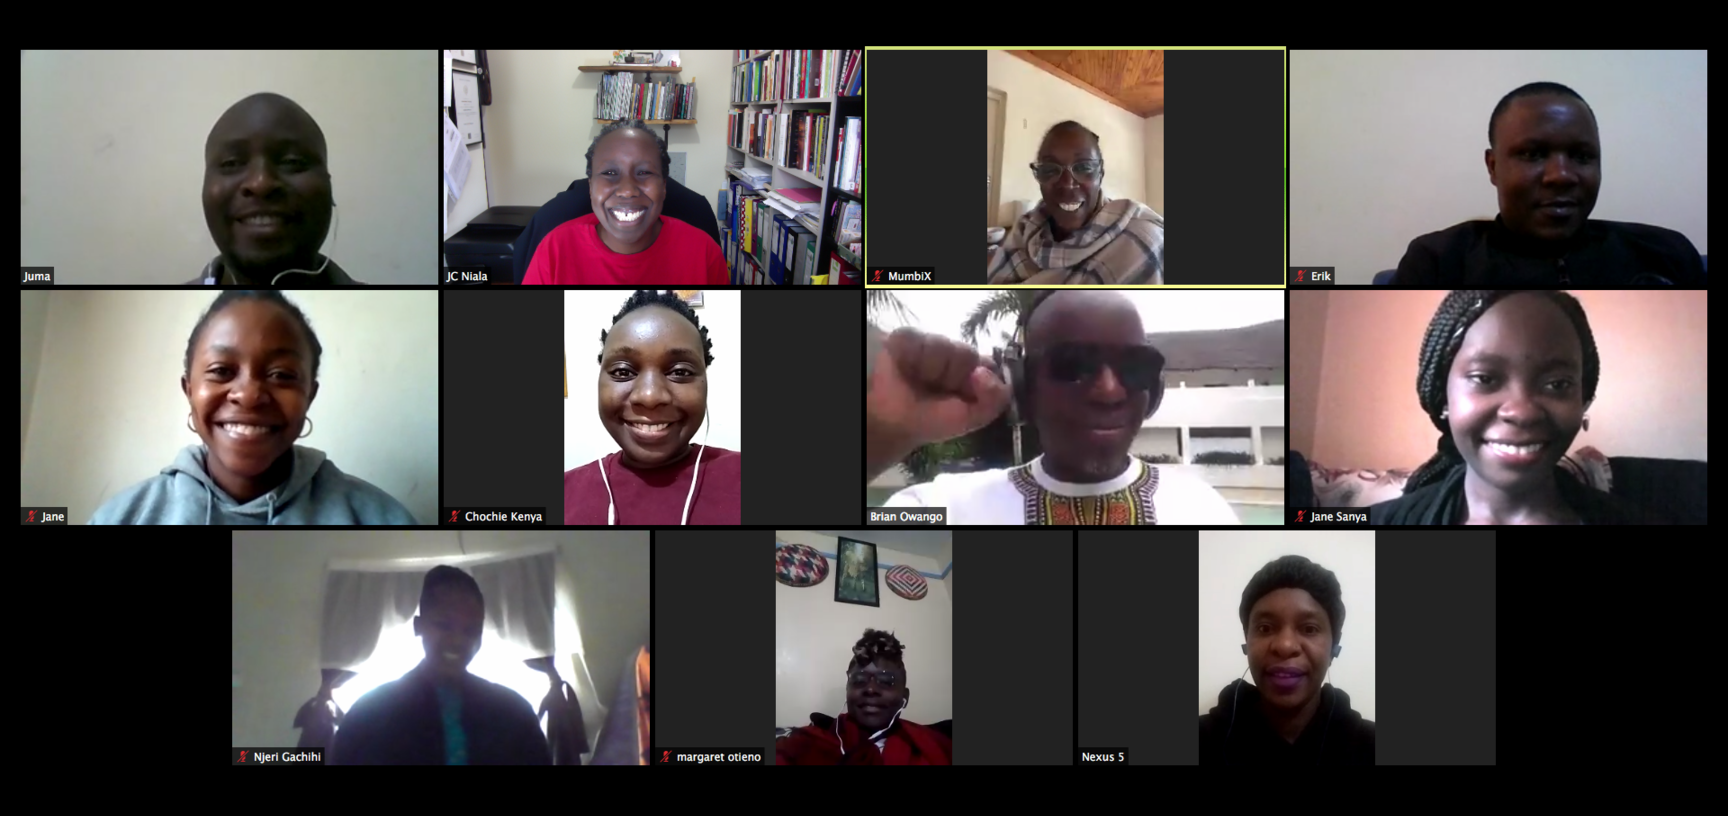 Kenya research project zoom meeting 18 July 2020